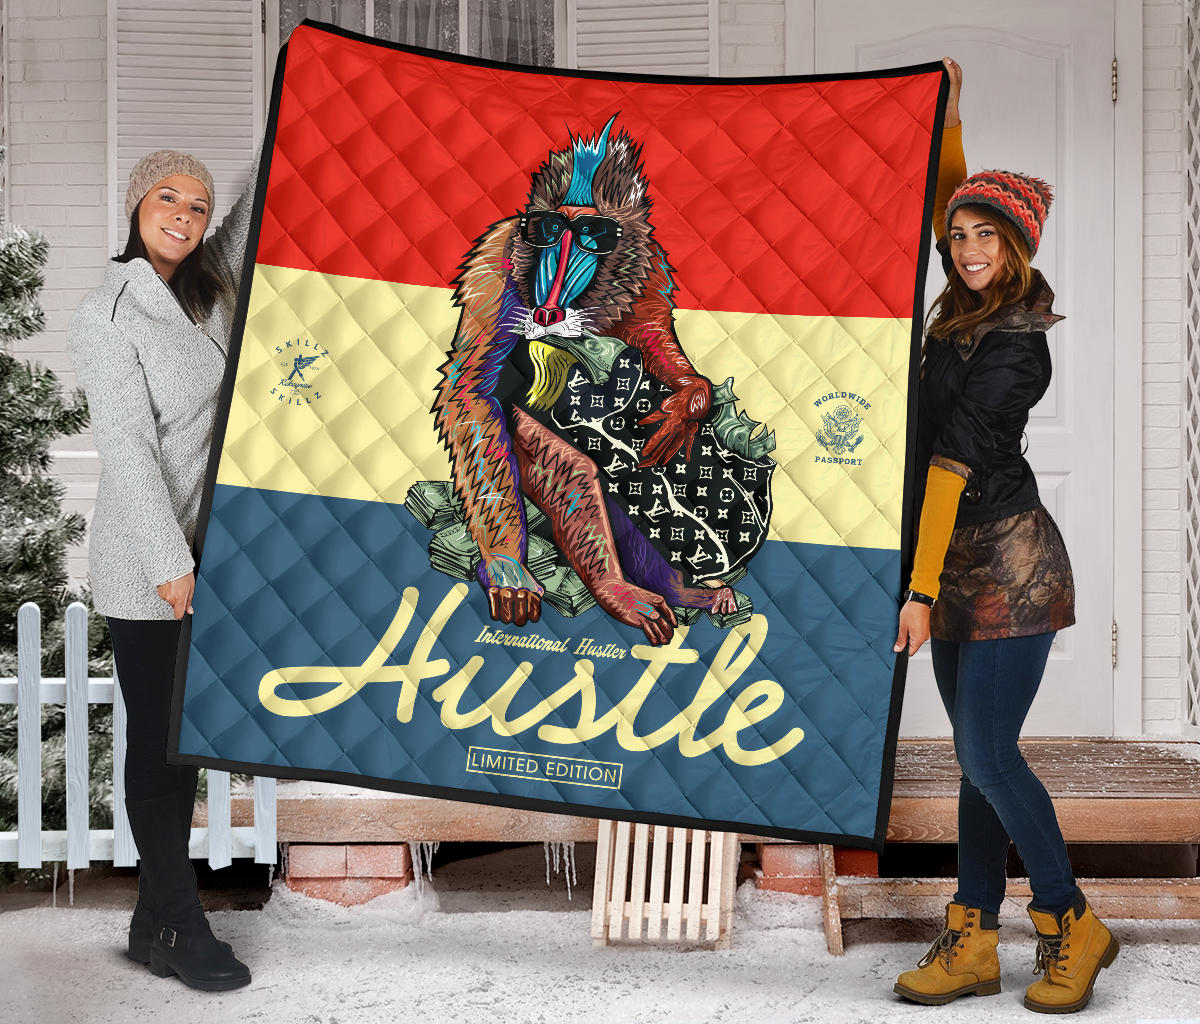 "Hustle Mammal" Limited Edition Quilt